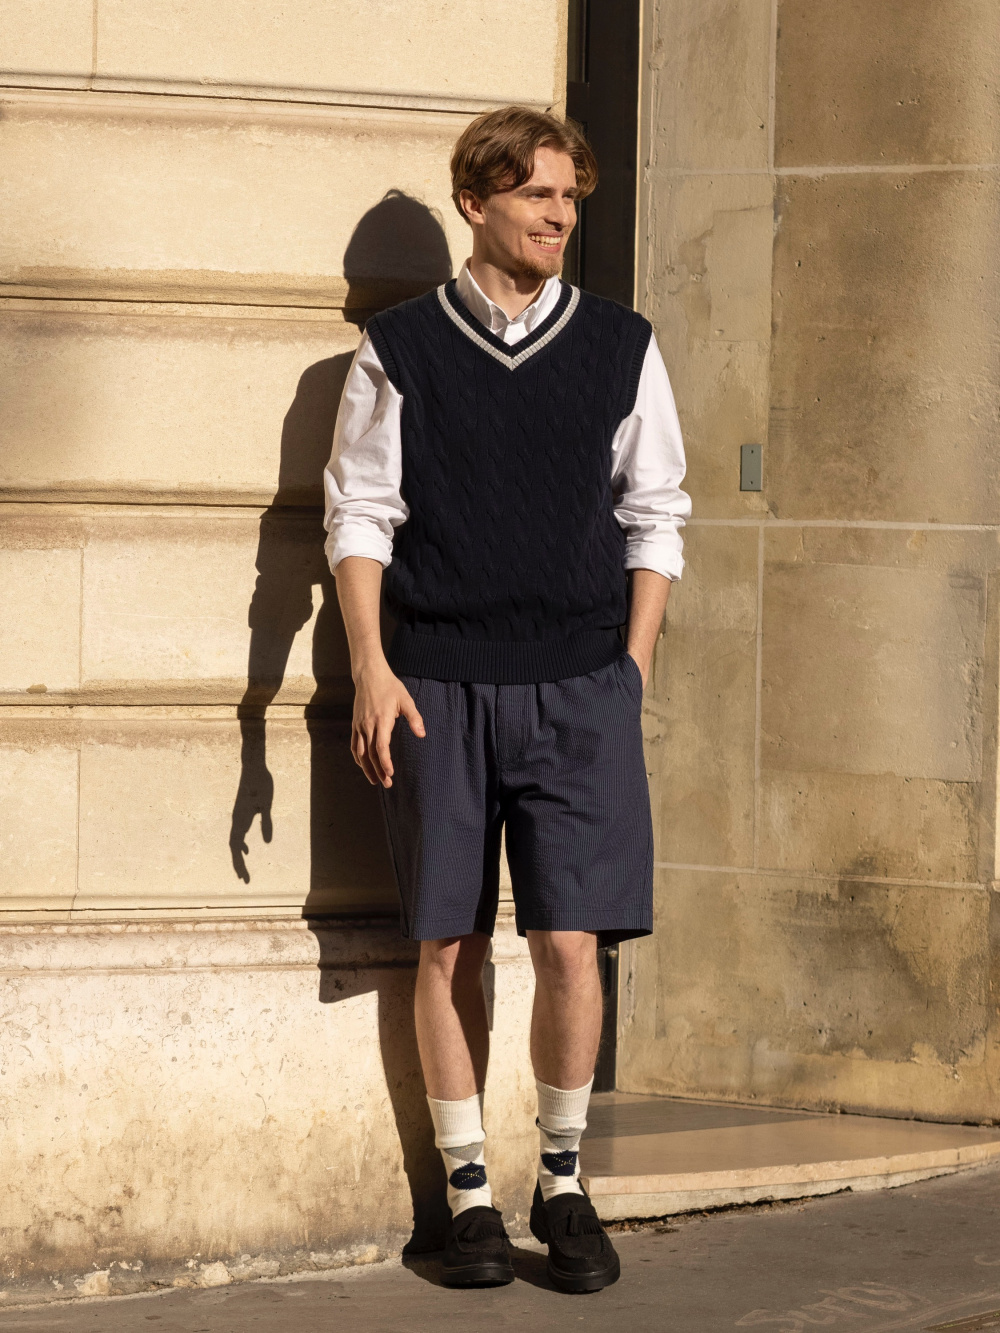 Sweater Vest Outfit Ideas For Men - How to Style Knitted With Tee